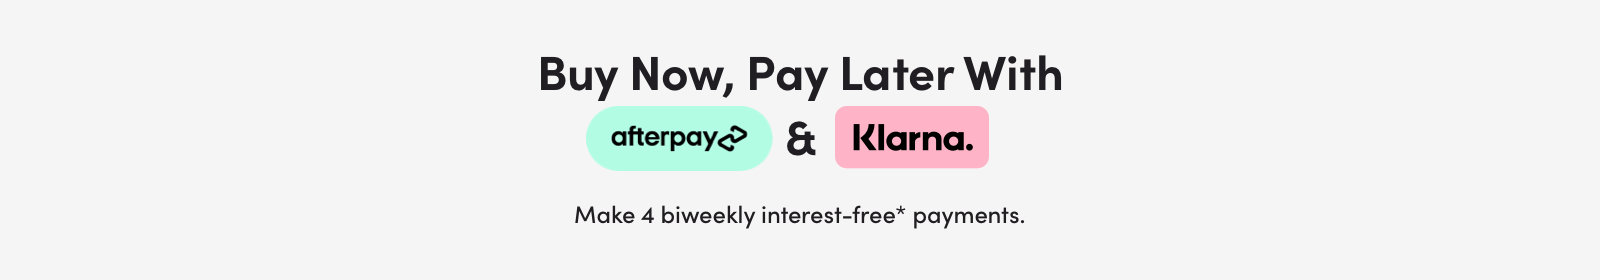 Afterpay. Enjoy Now, Shop Now. Pay Later – Fawn Design